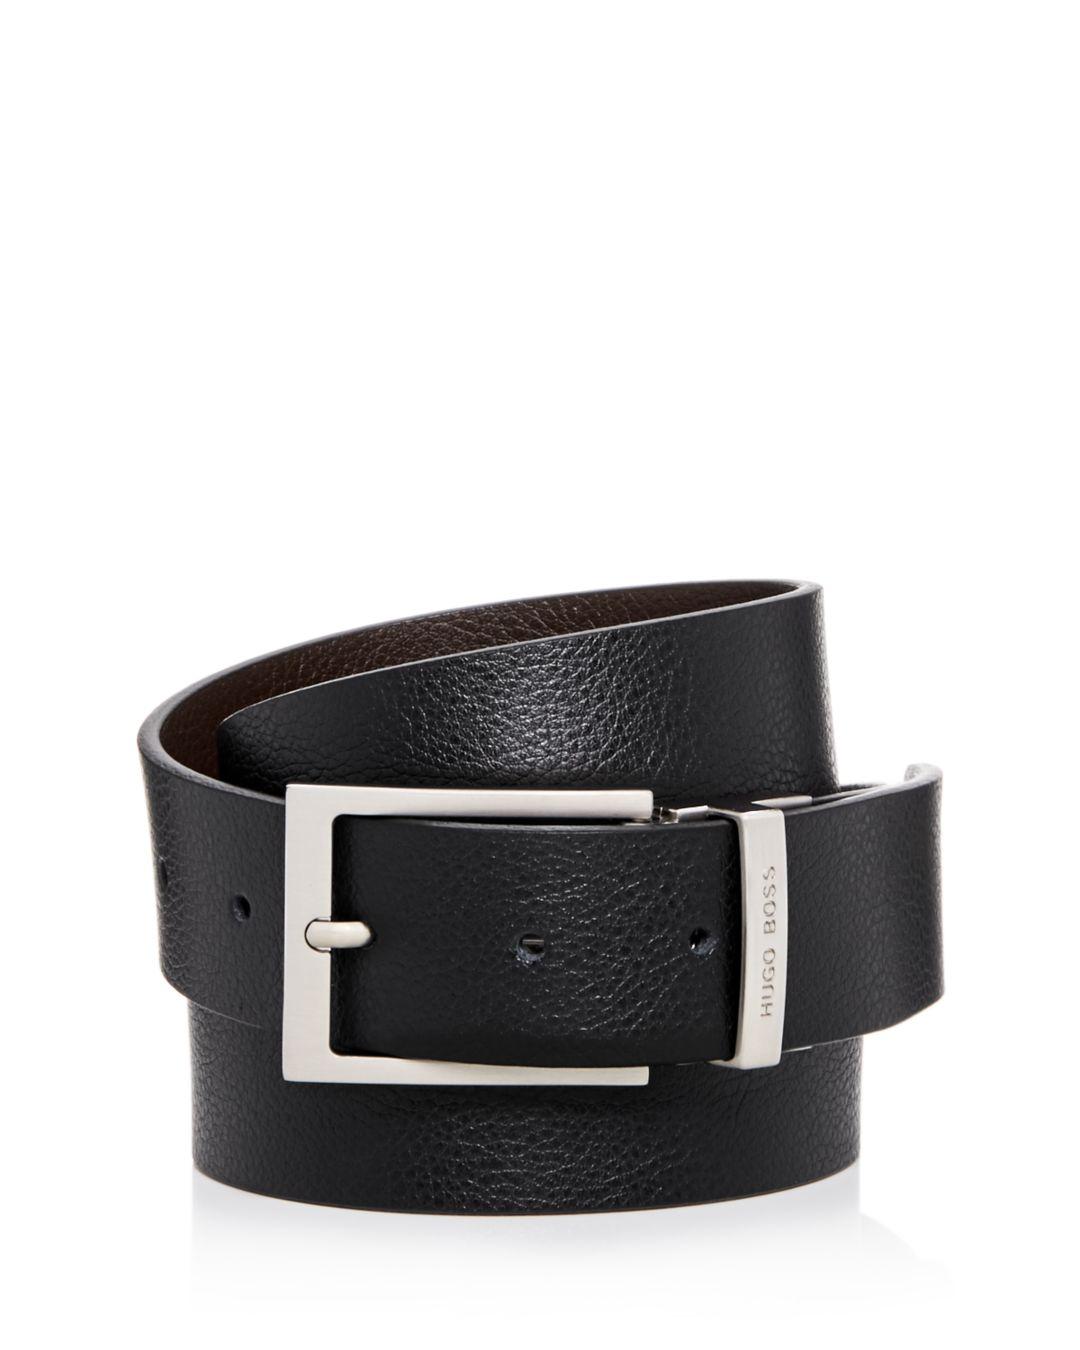 Reming Reversible Leather Belt 